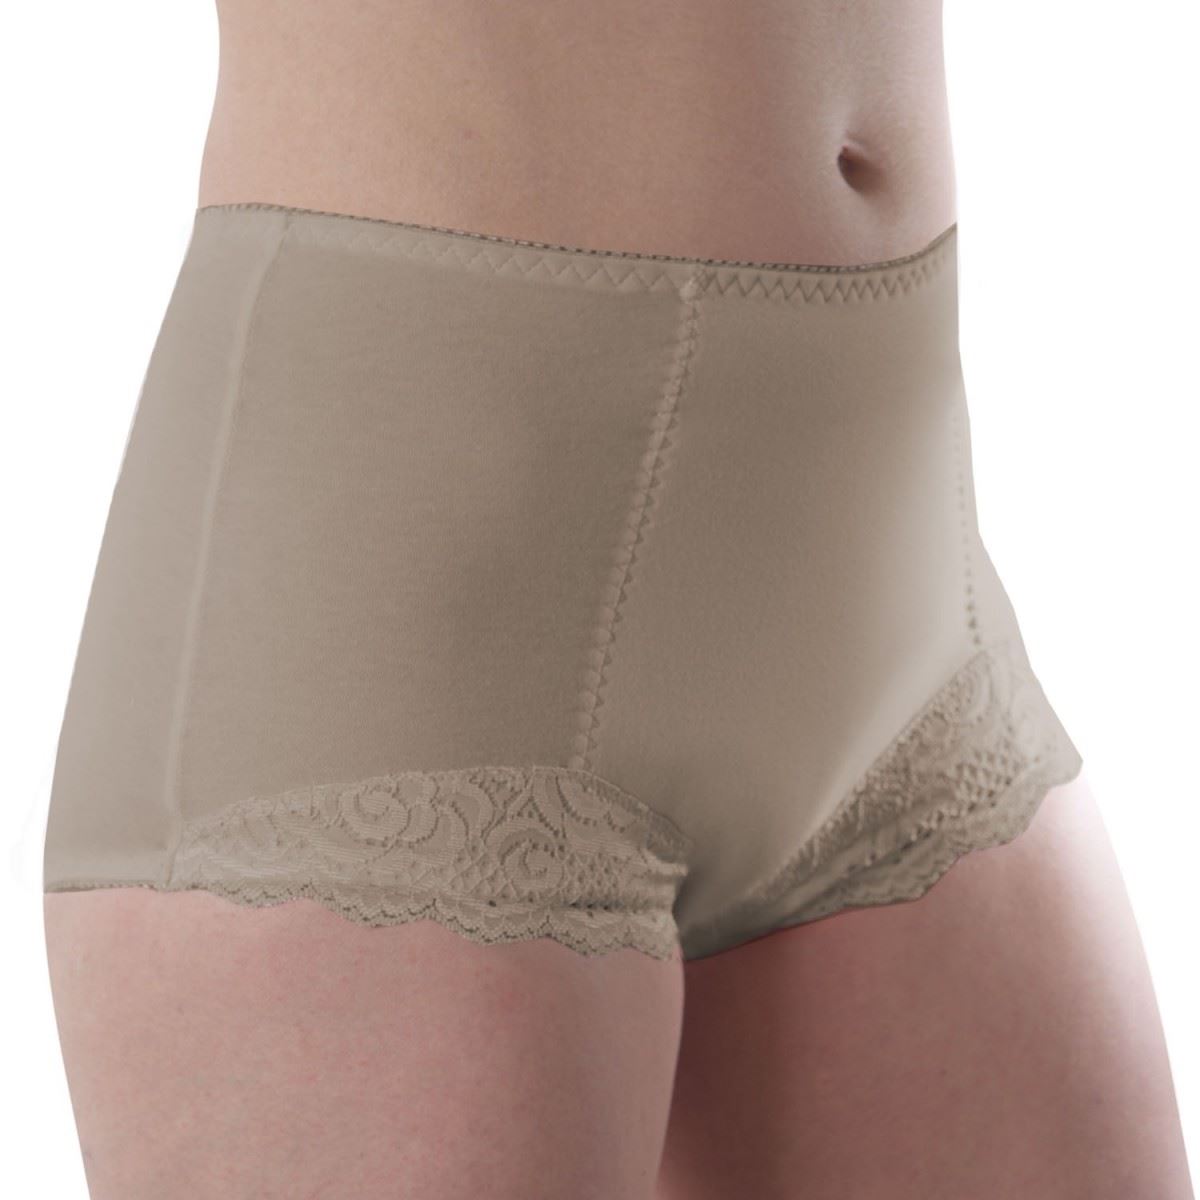 https://prismhealthservices.net/content/images/thumbs/0000544_conni-womens-chantilly-reusable-underwear.jpeg